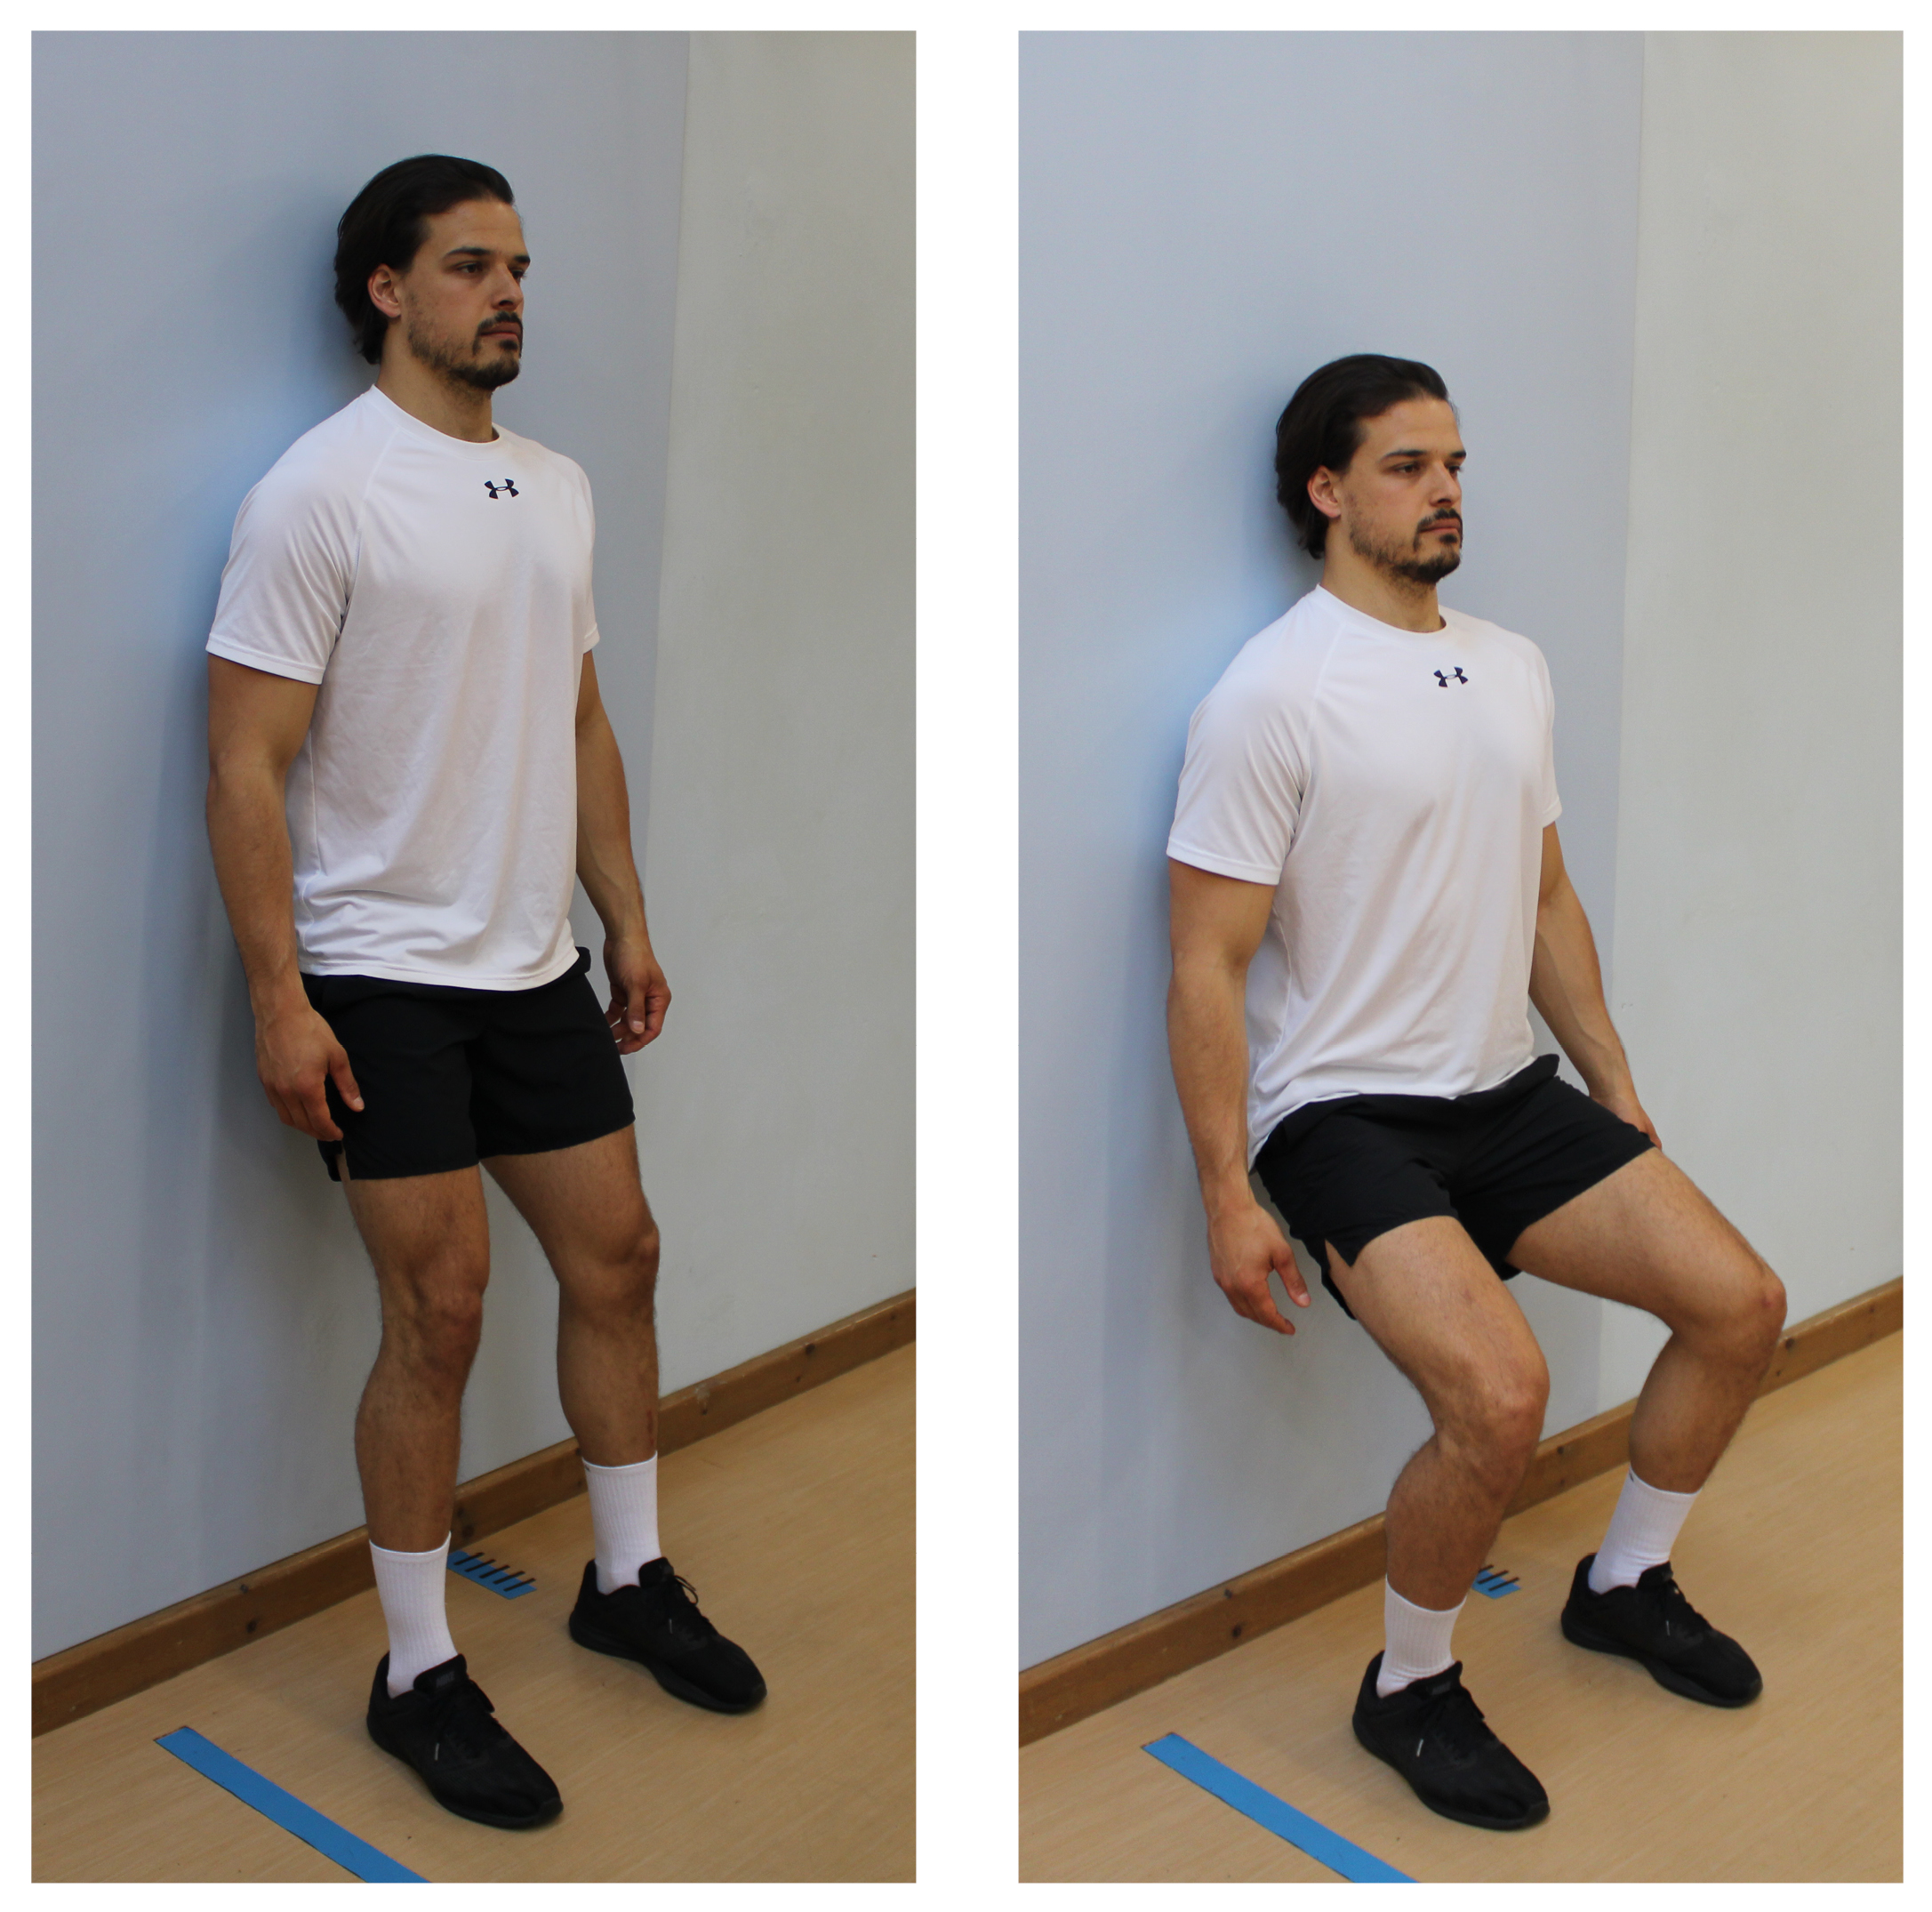 Wall squats exercise